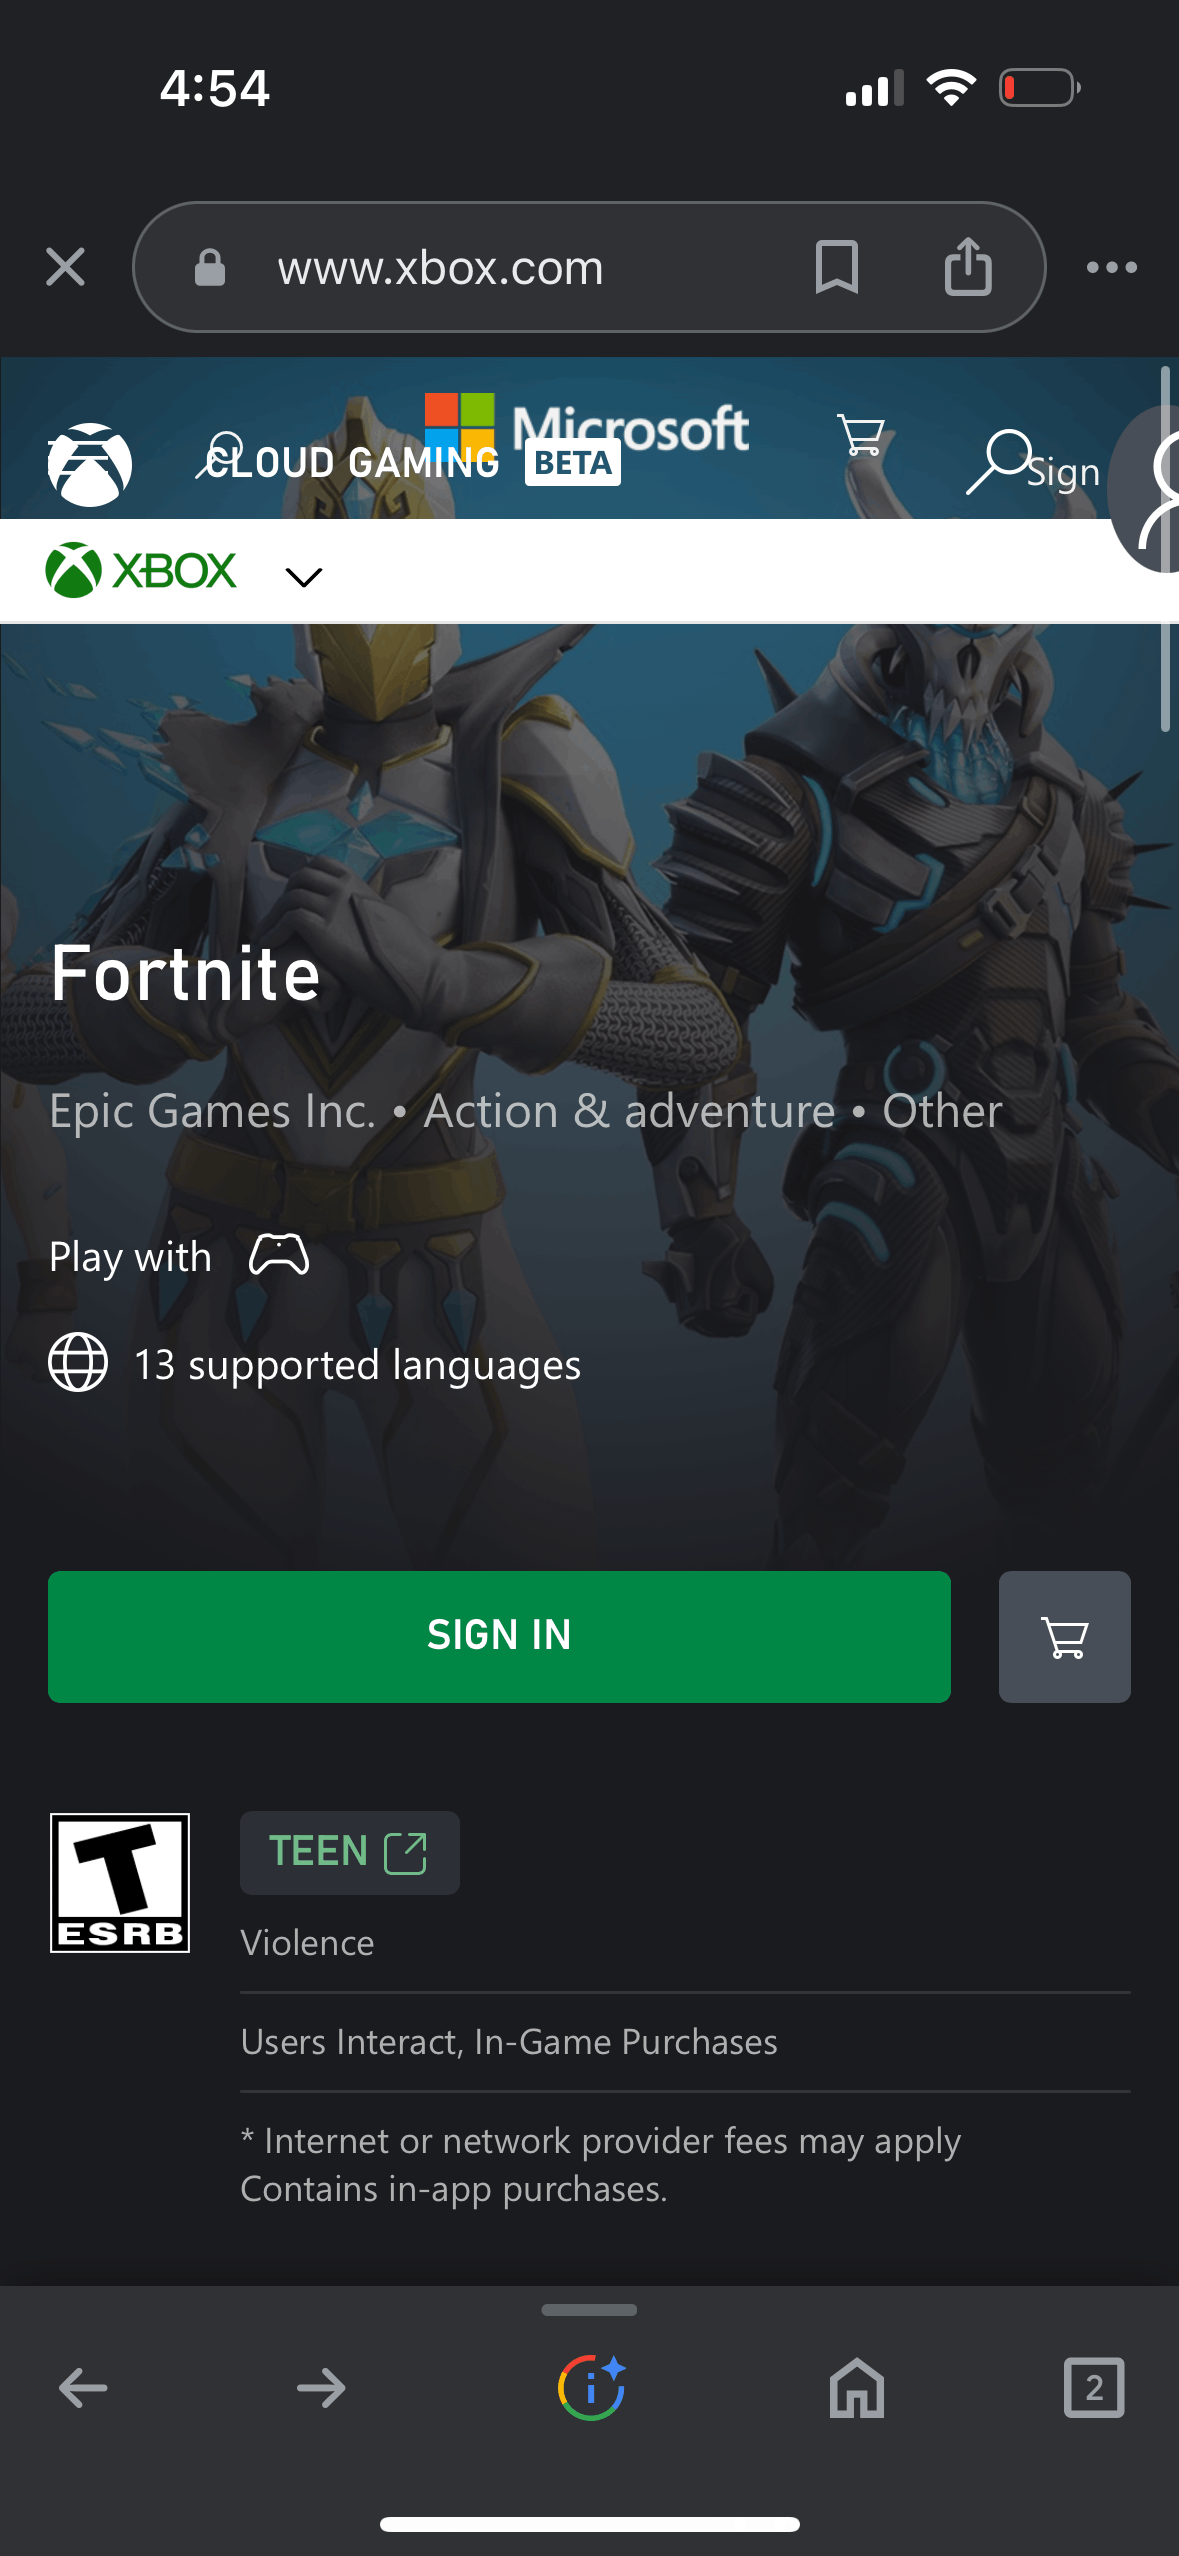 Fortnite through cloud gaming is not working for me. - Microsoft